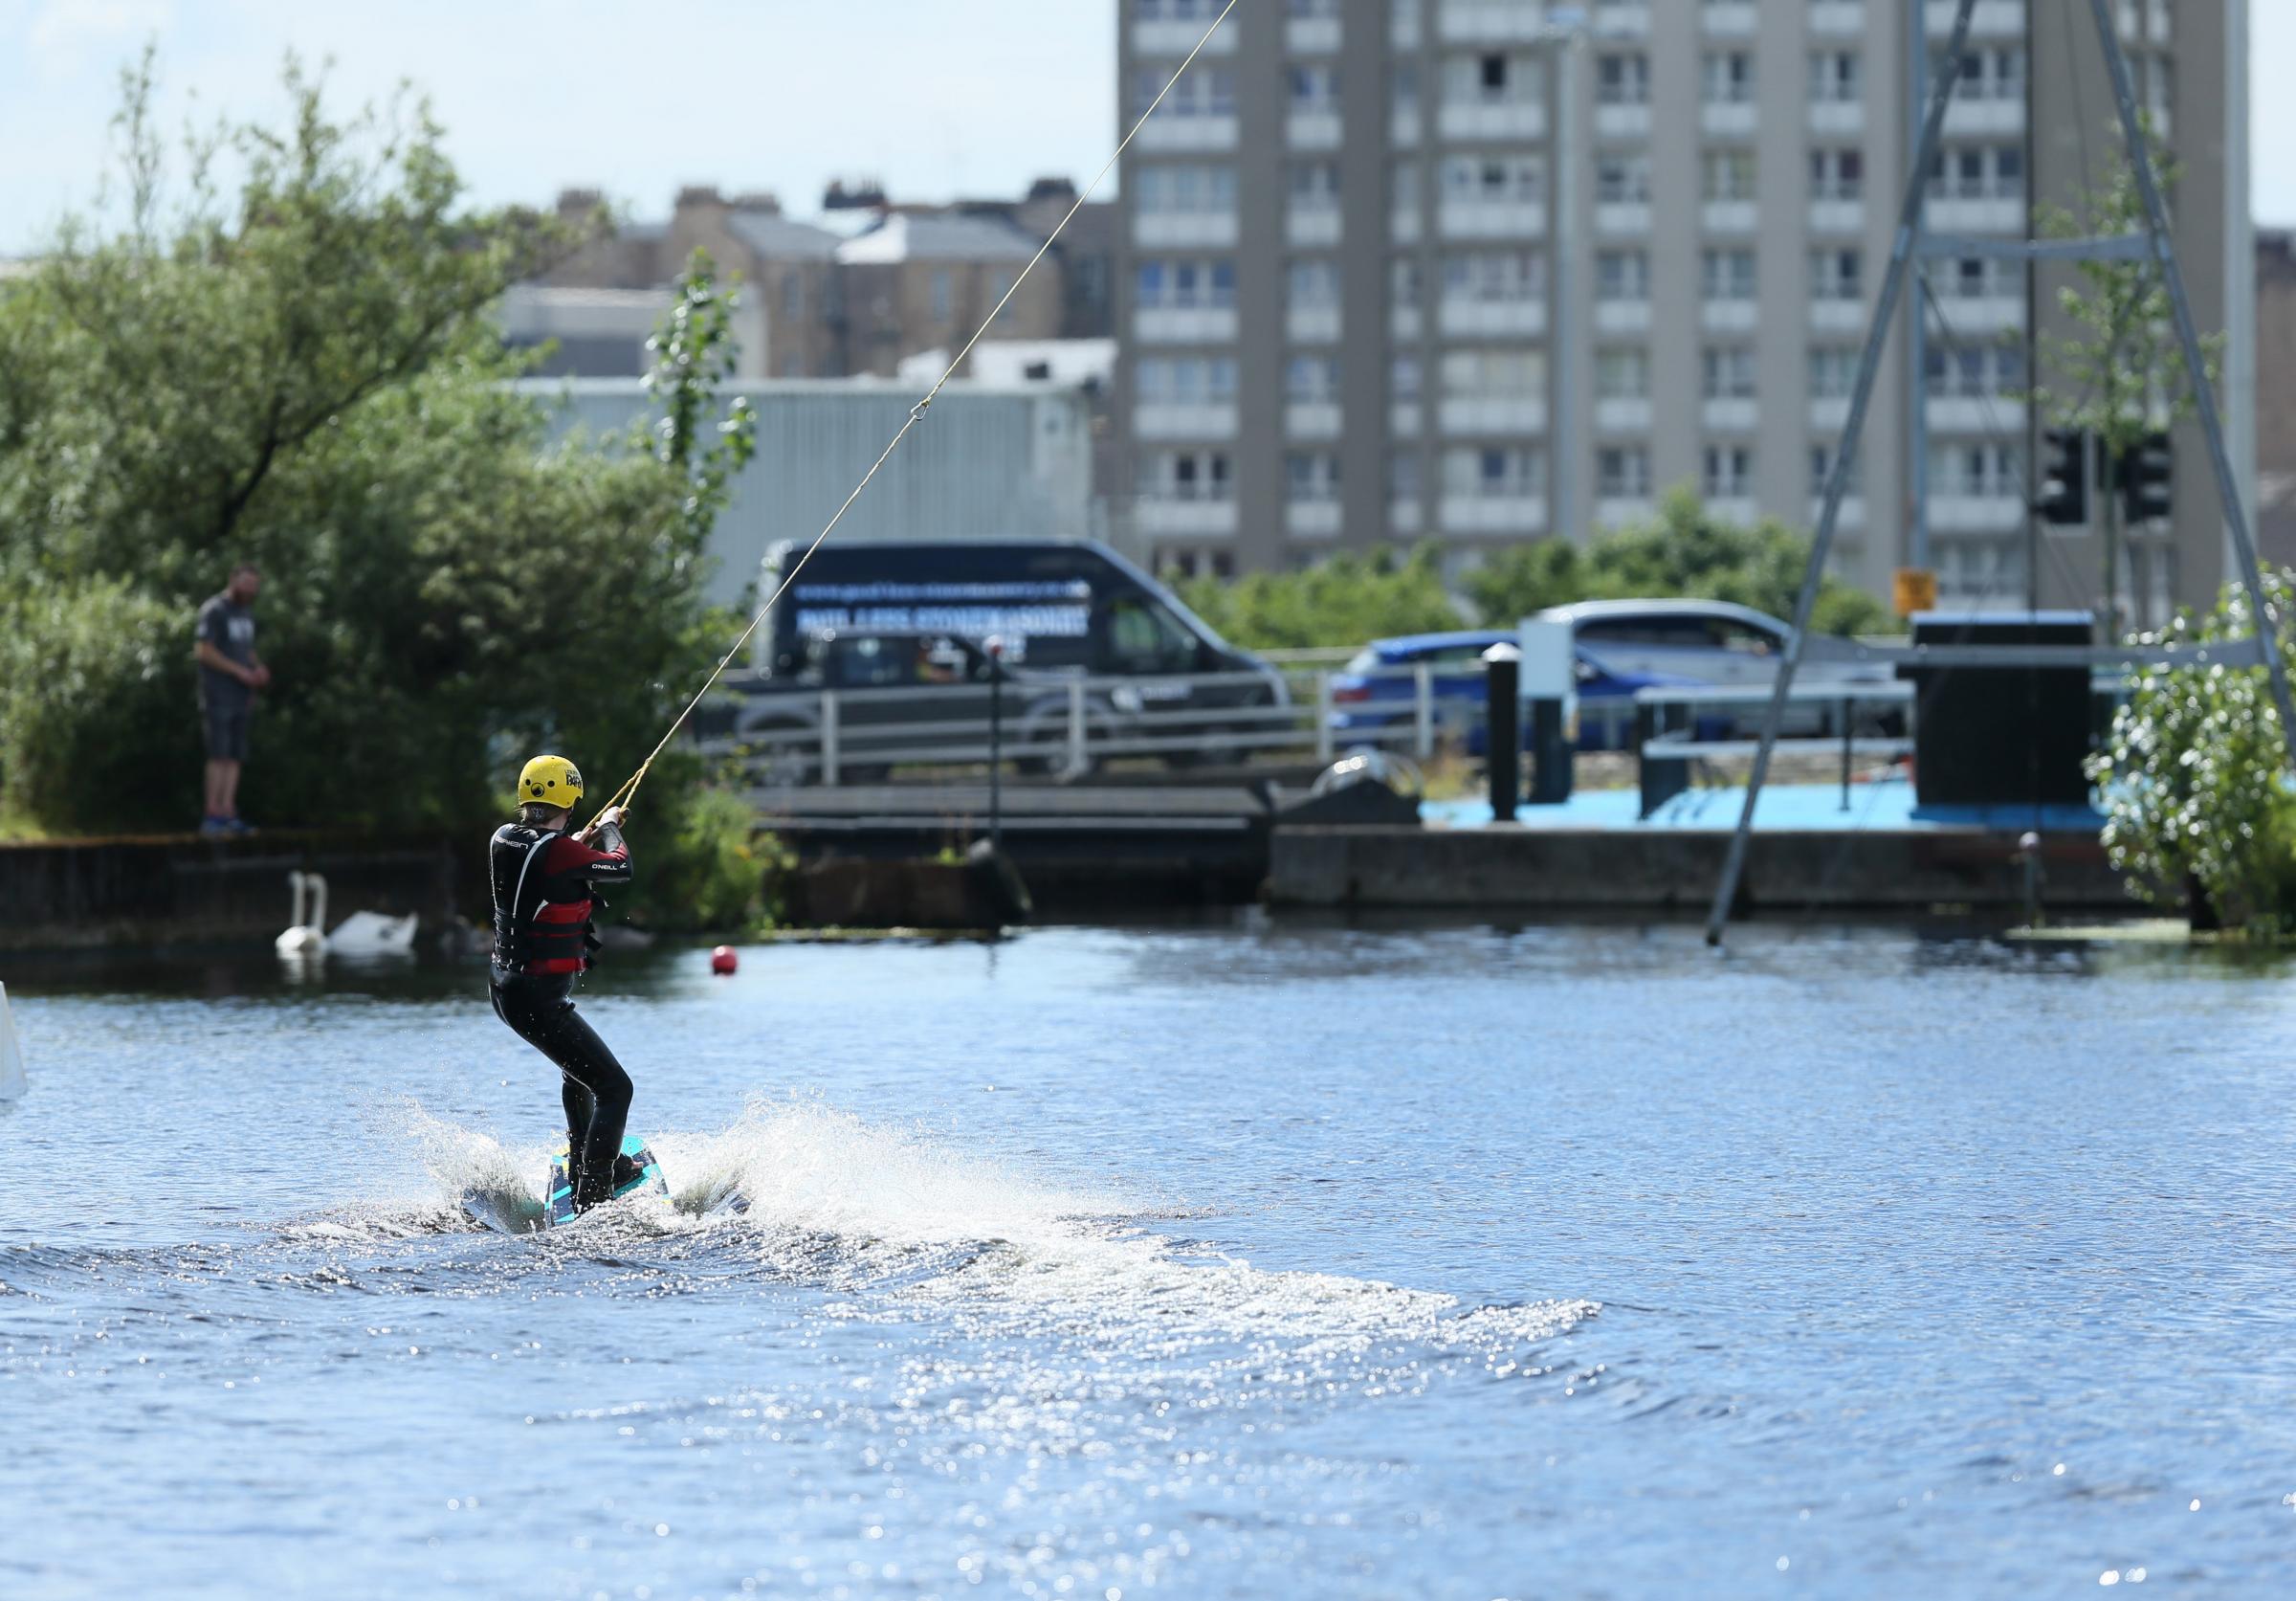 Pinkston watersports centre launched family-friendly adventure packages – Glasgow Times